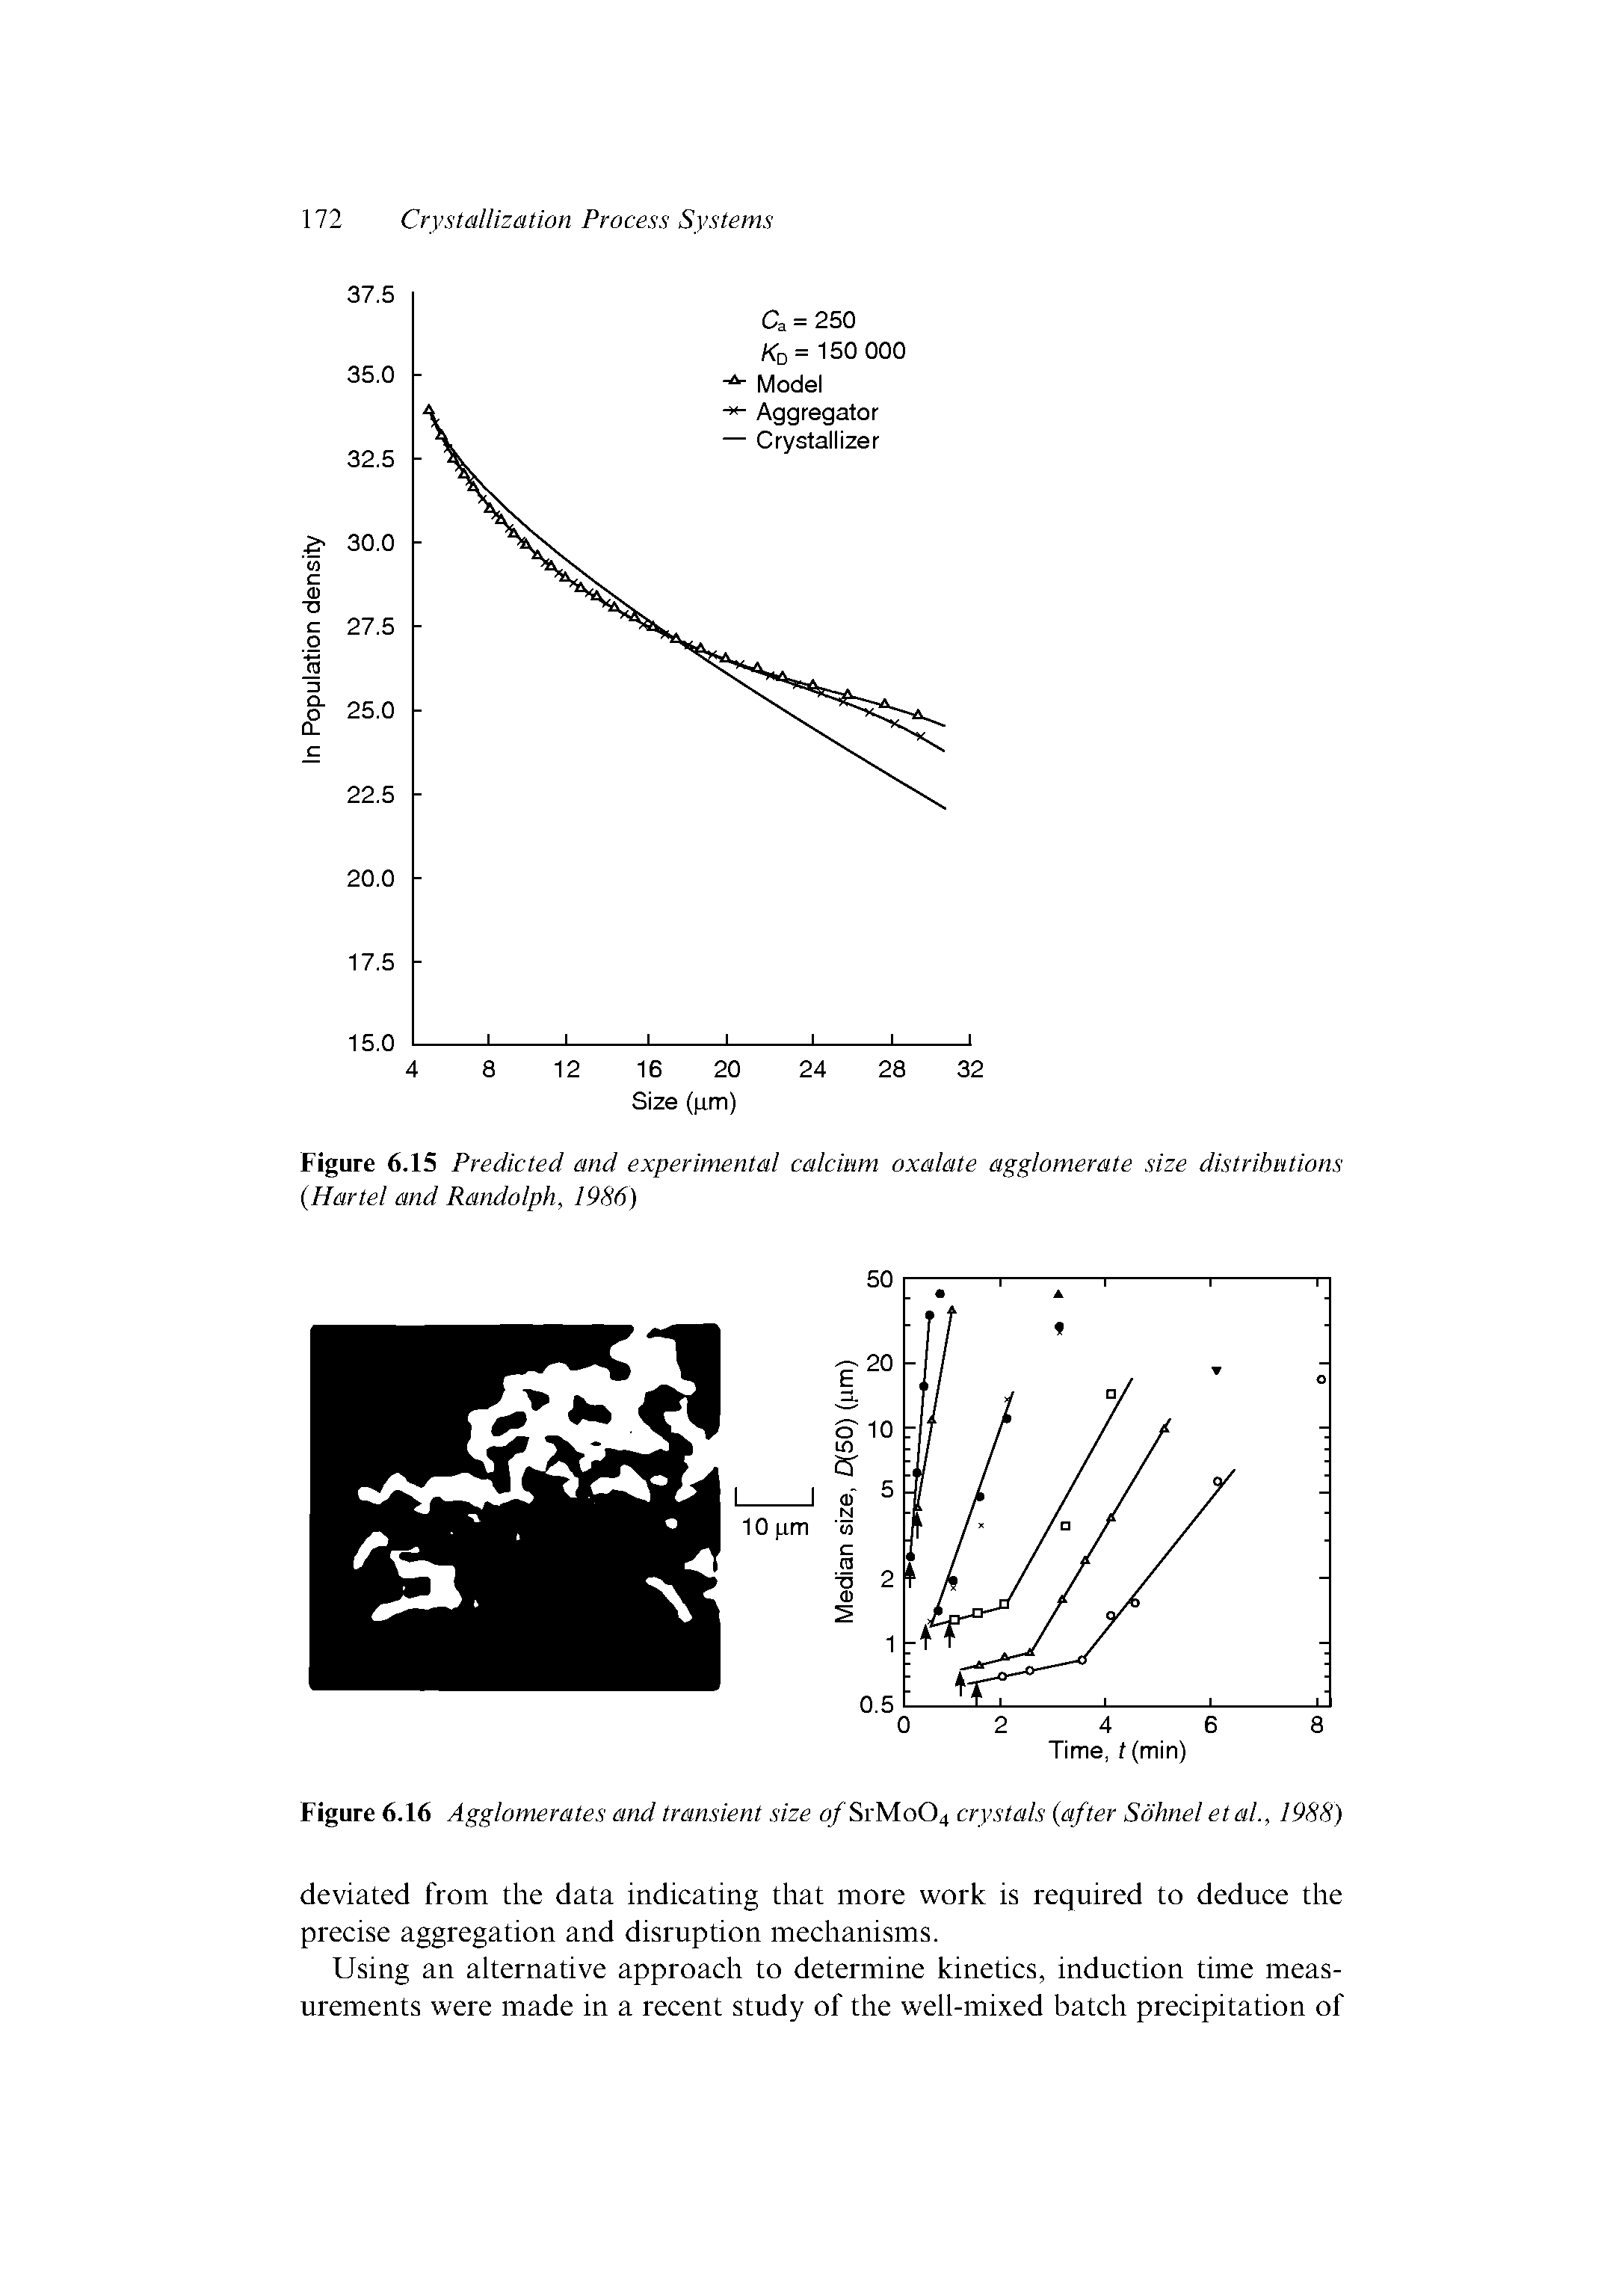 Figure 6.15 Predicted and experimental calcium oxalate agglomerate size distributions (Hartel and Randolph, 1986)...